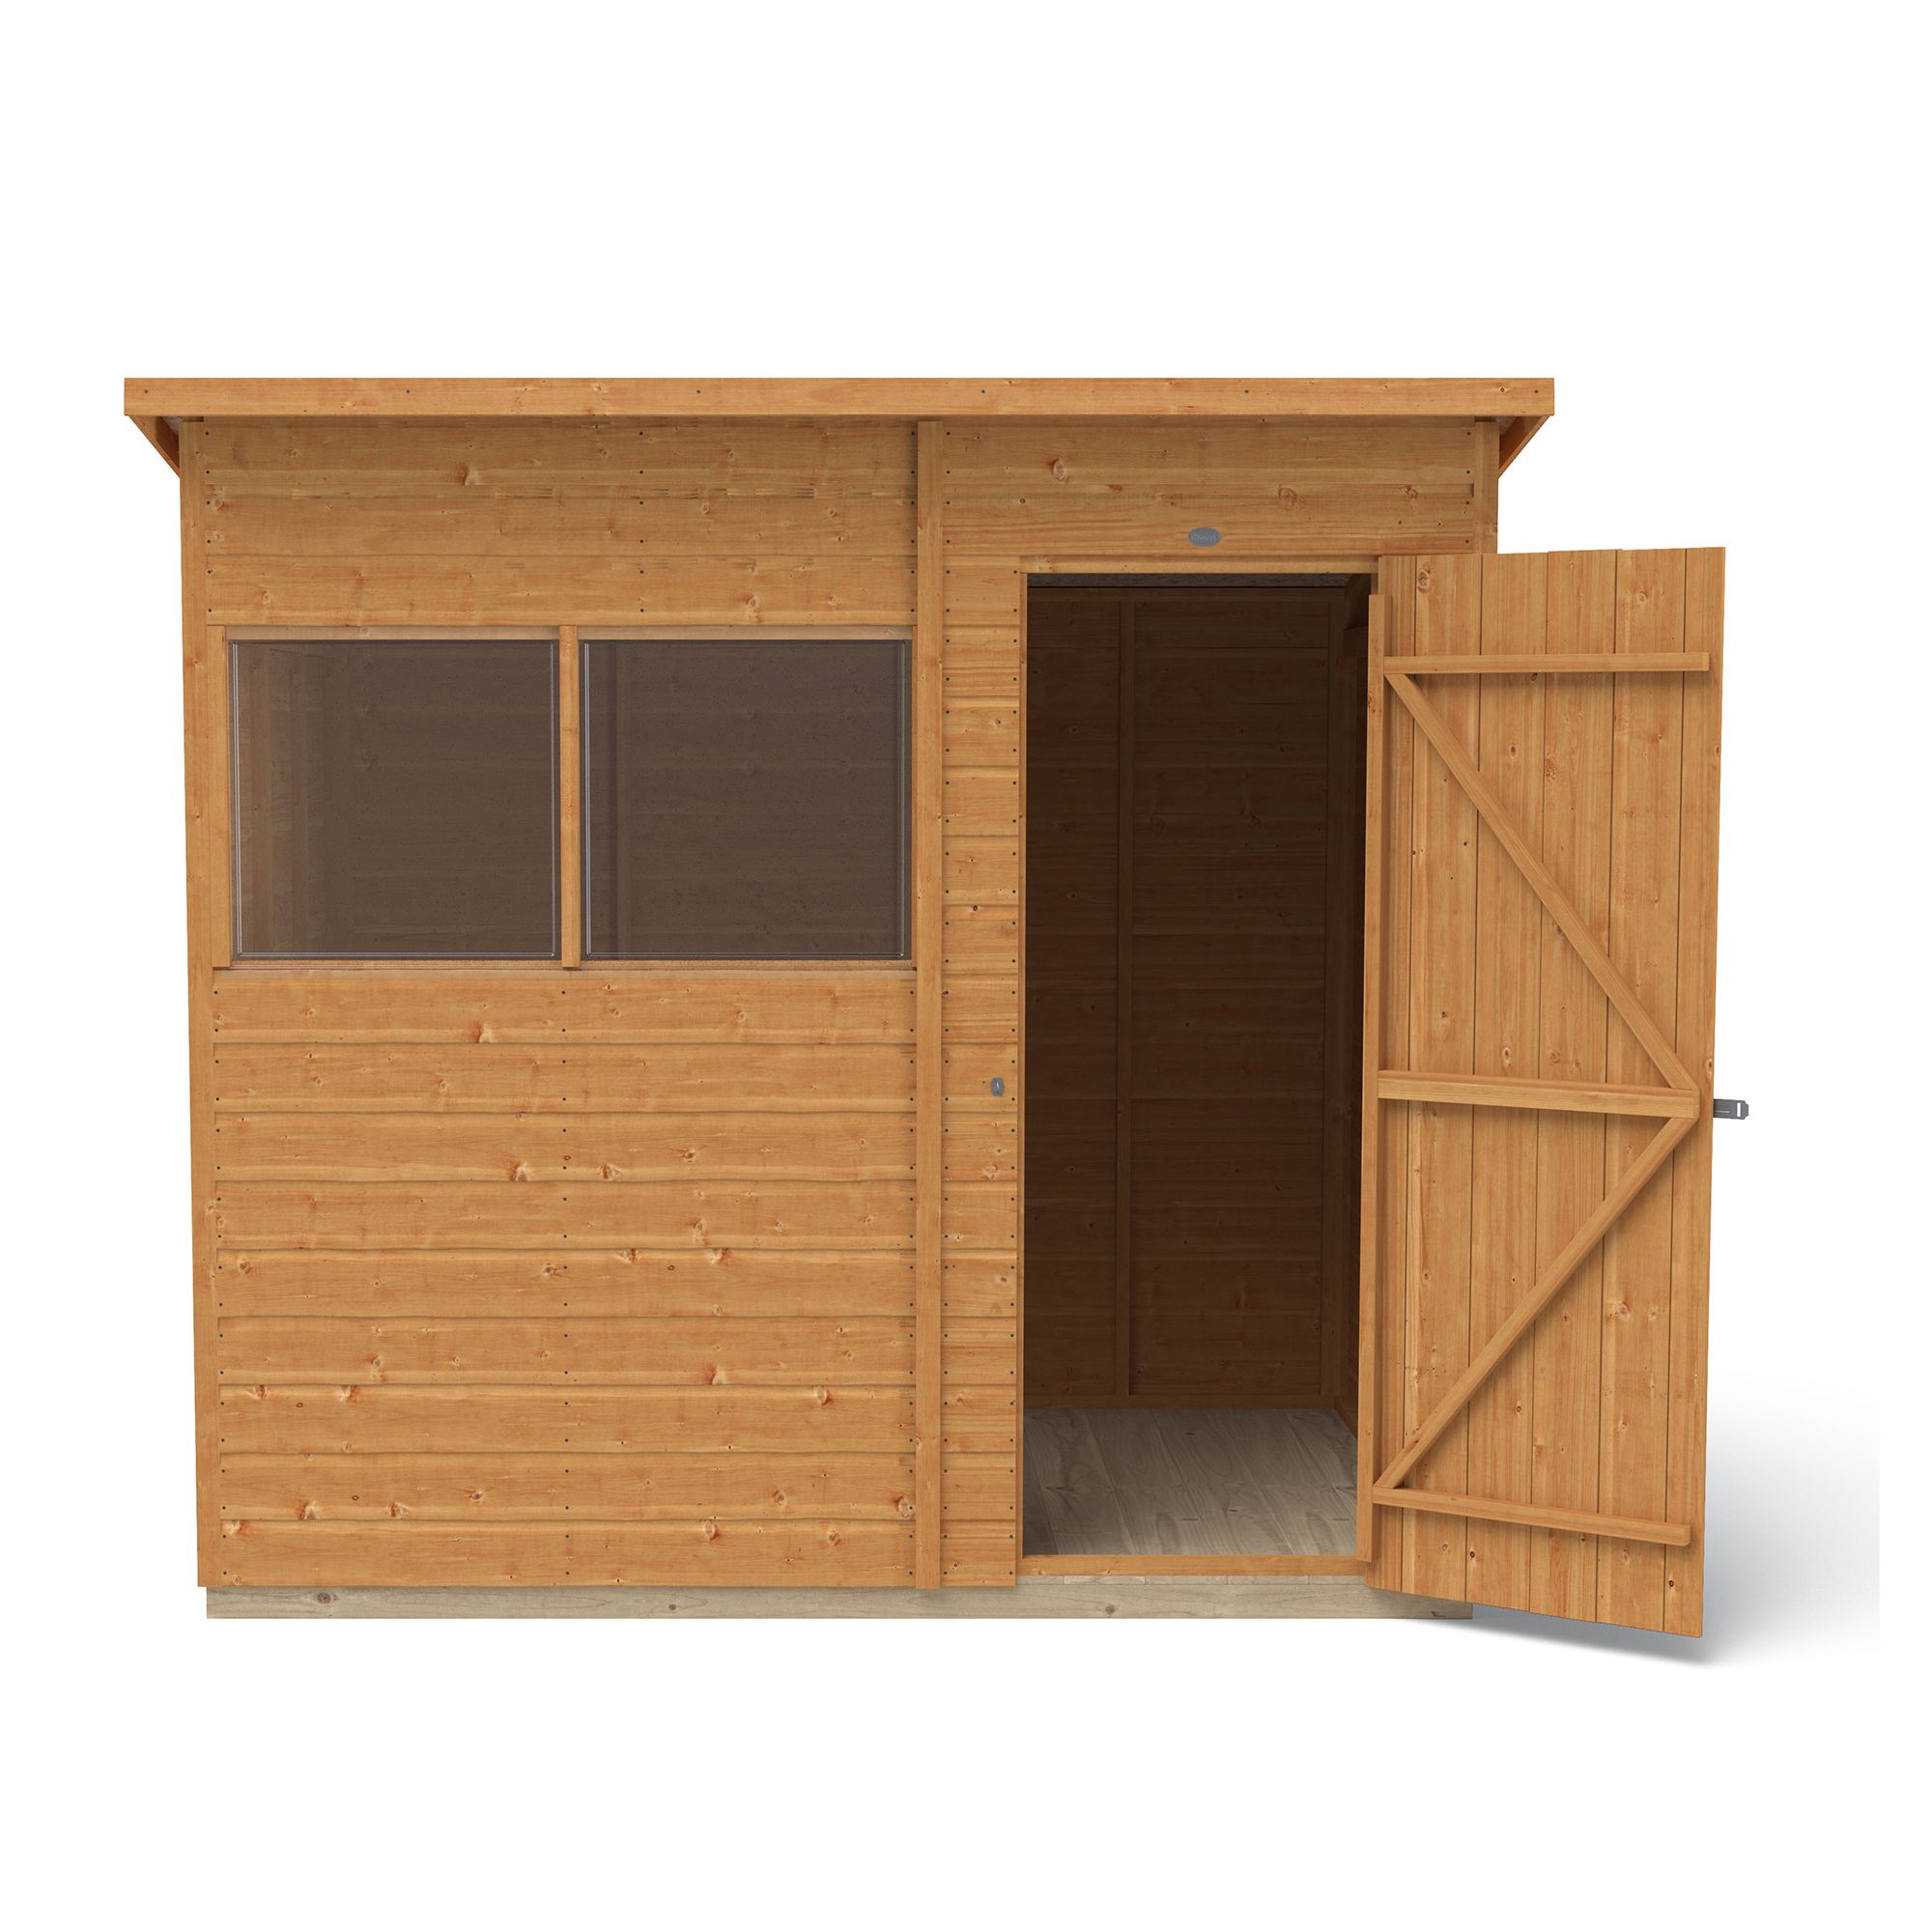 Forest Garden Shiplap 7x5 ft Pent Wooden Shed with floor & 2 windows (Base included) - Assembly service included